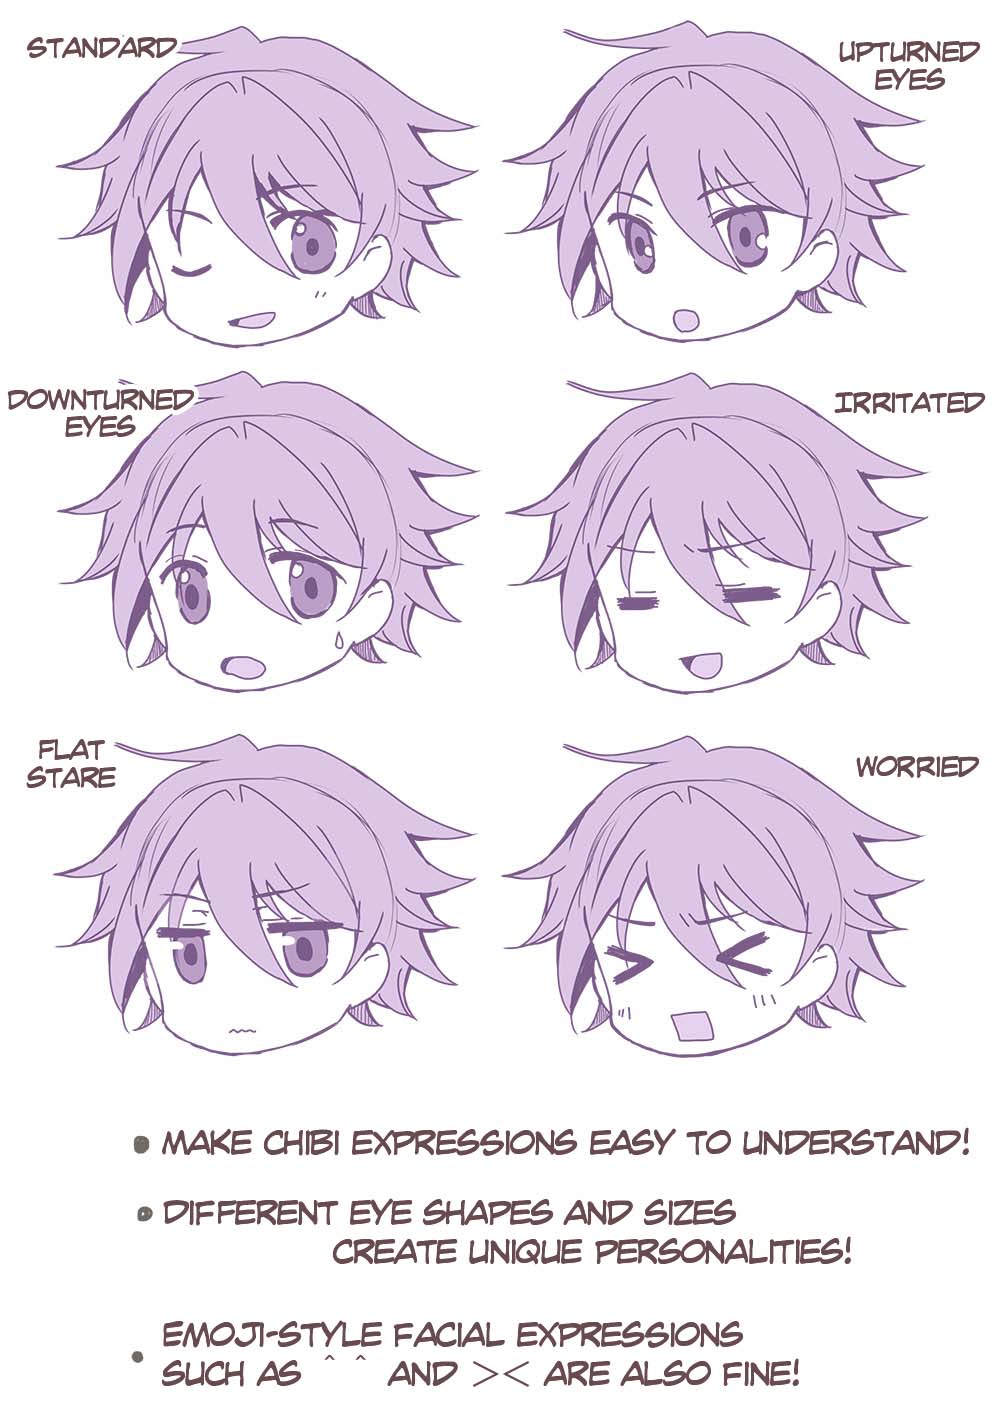 How to Draw Chibi Eyes Ver 2  DrawingNow